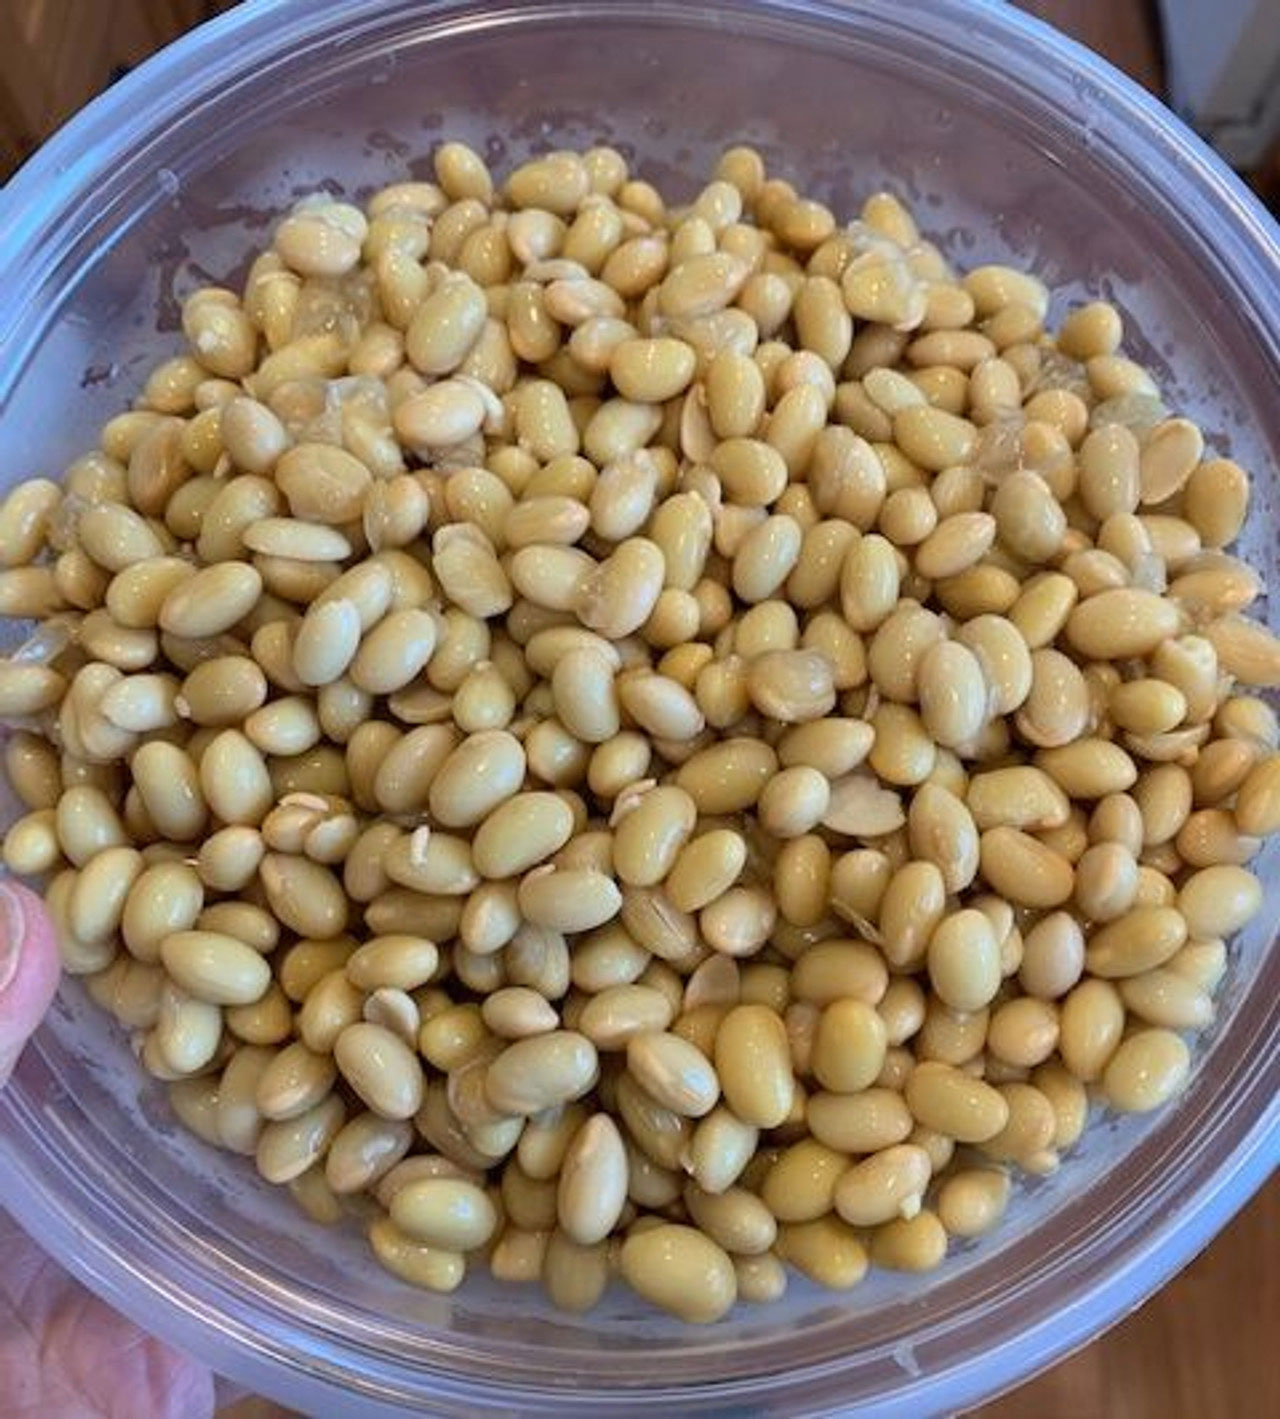 A plastic container filled with pressure cooked Laura Soybeans